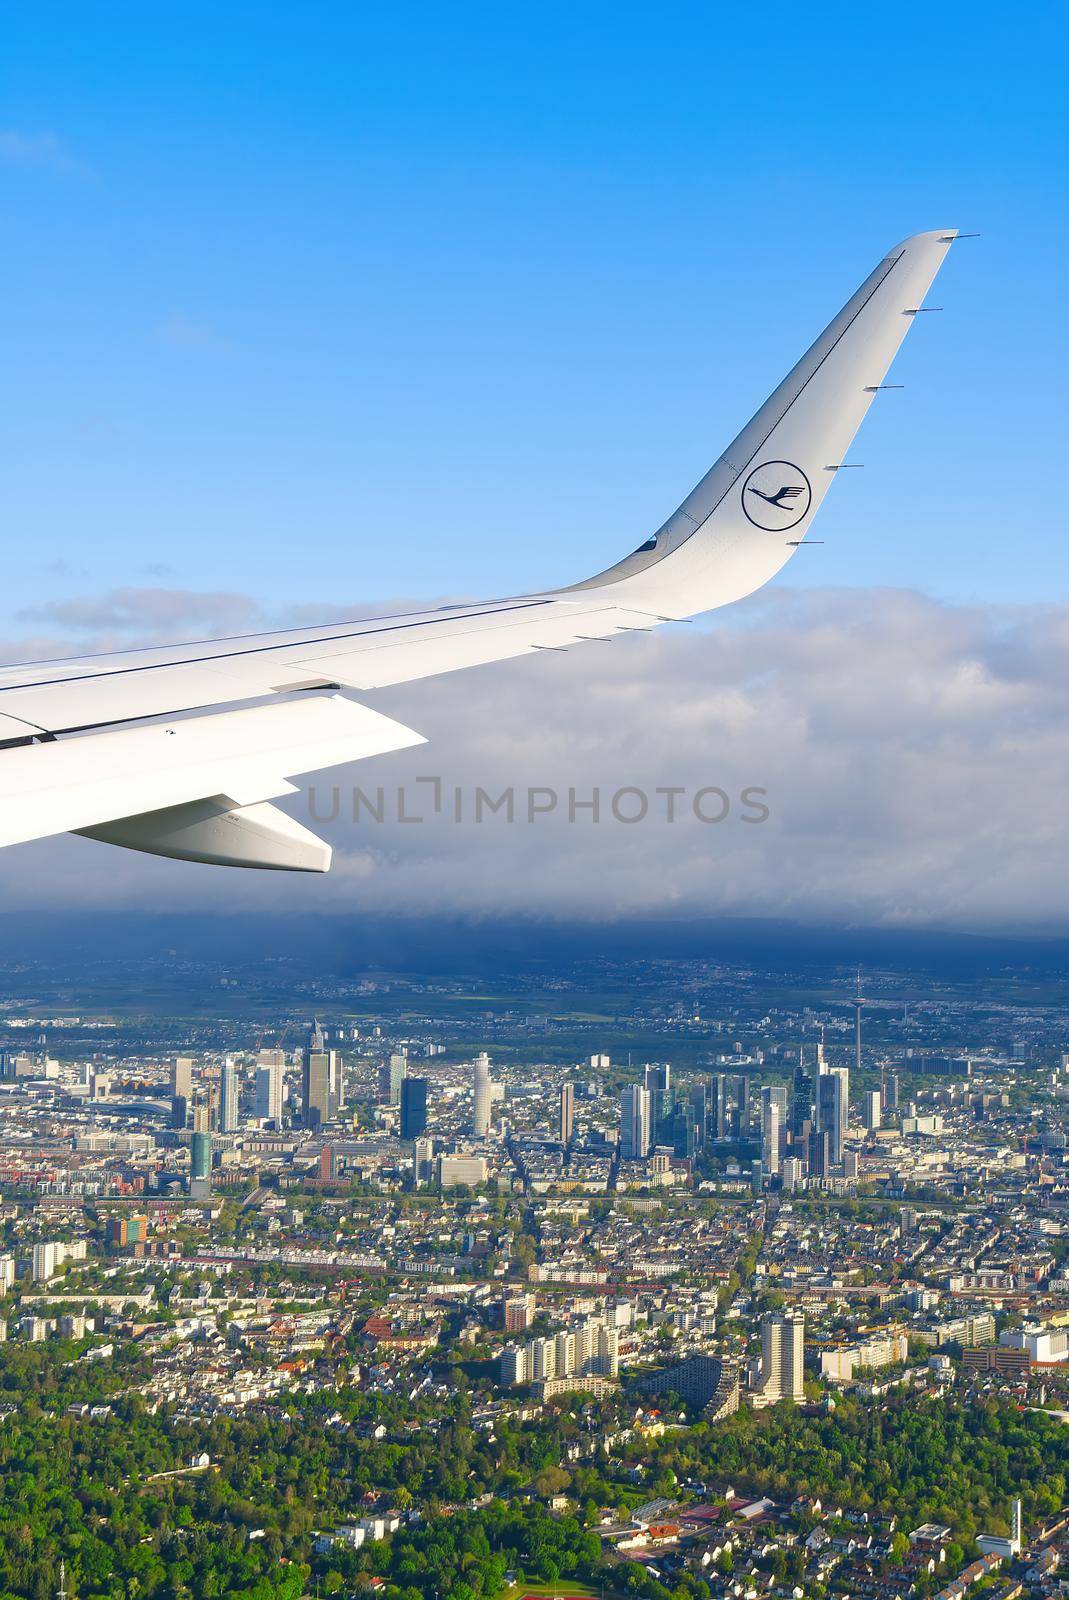 22.05.2021 Frankfurt, Germany - The Airbus A321 wing with Lufthansa airline logo and blue sky over clouds background. airplane wing on landing in frankfurt am main